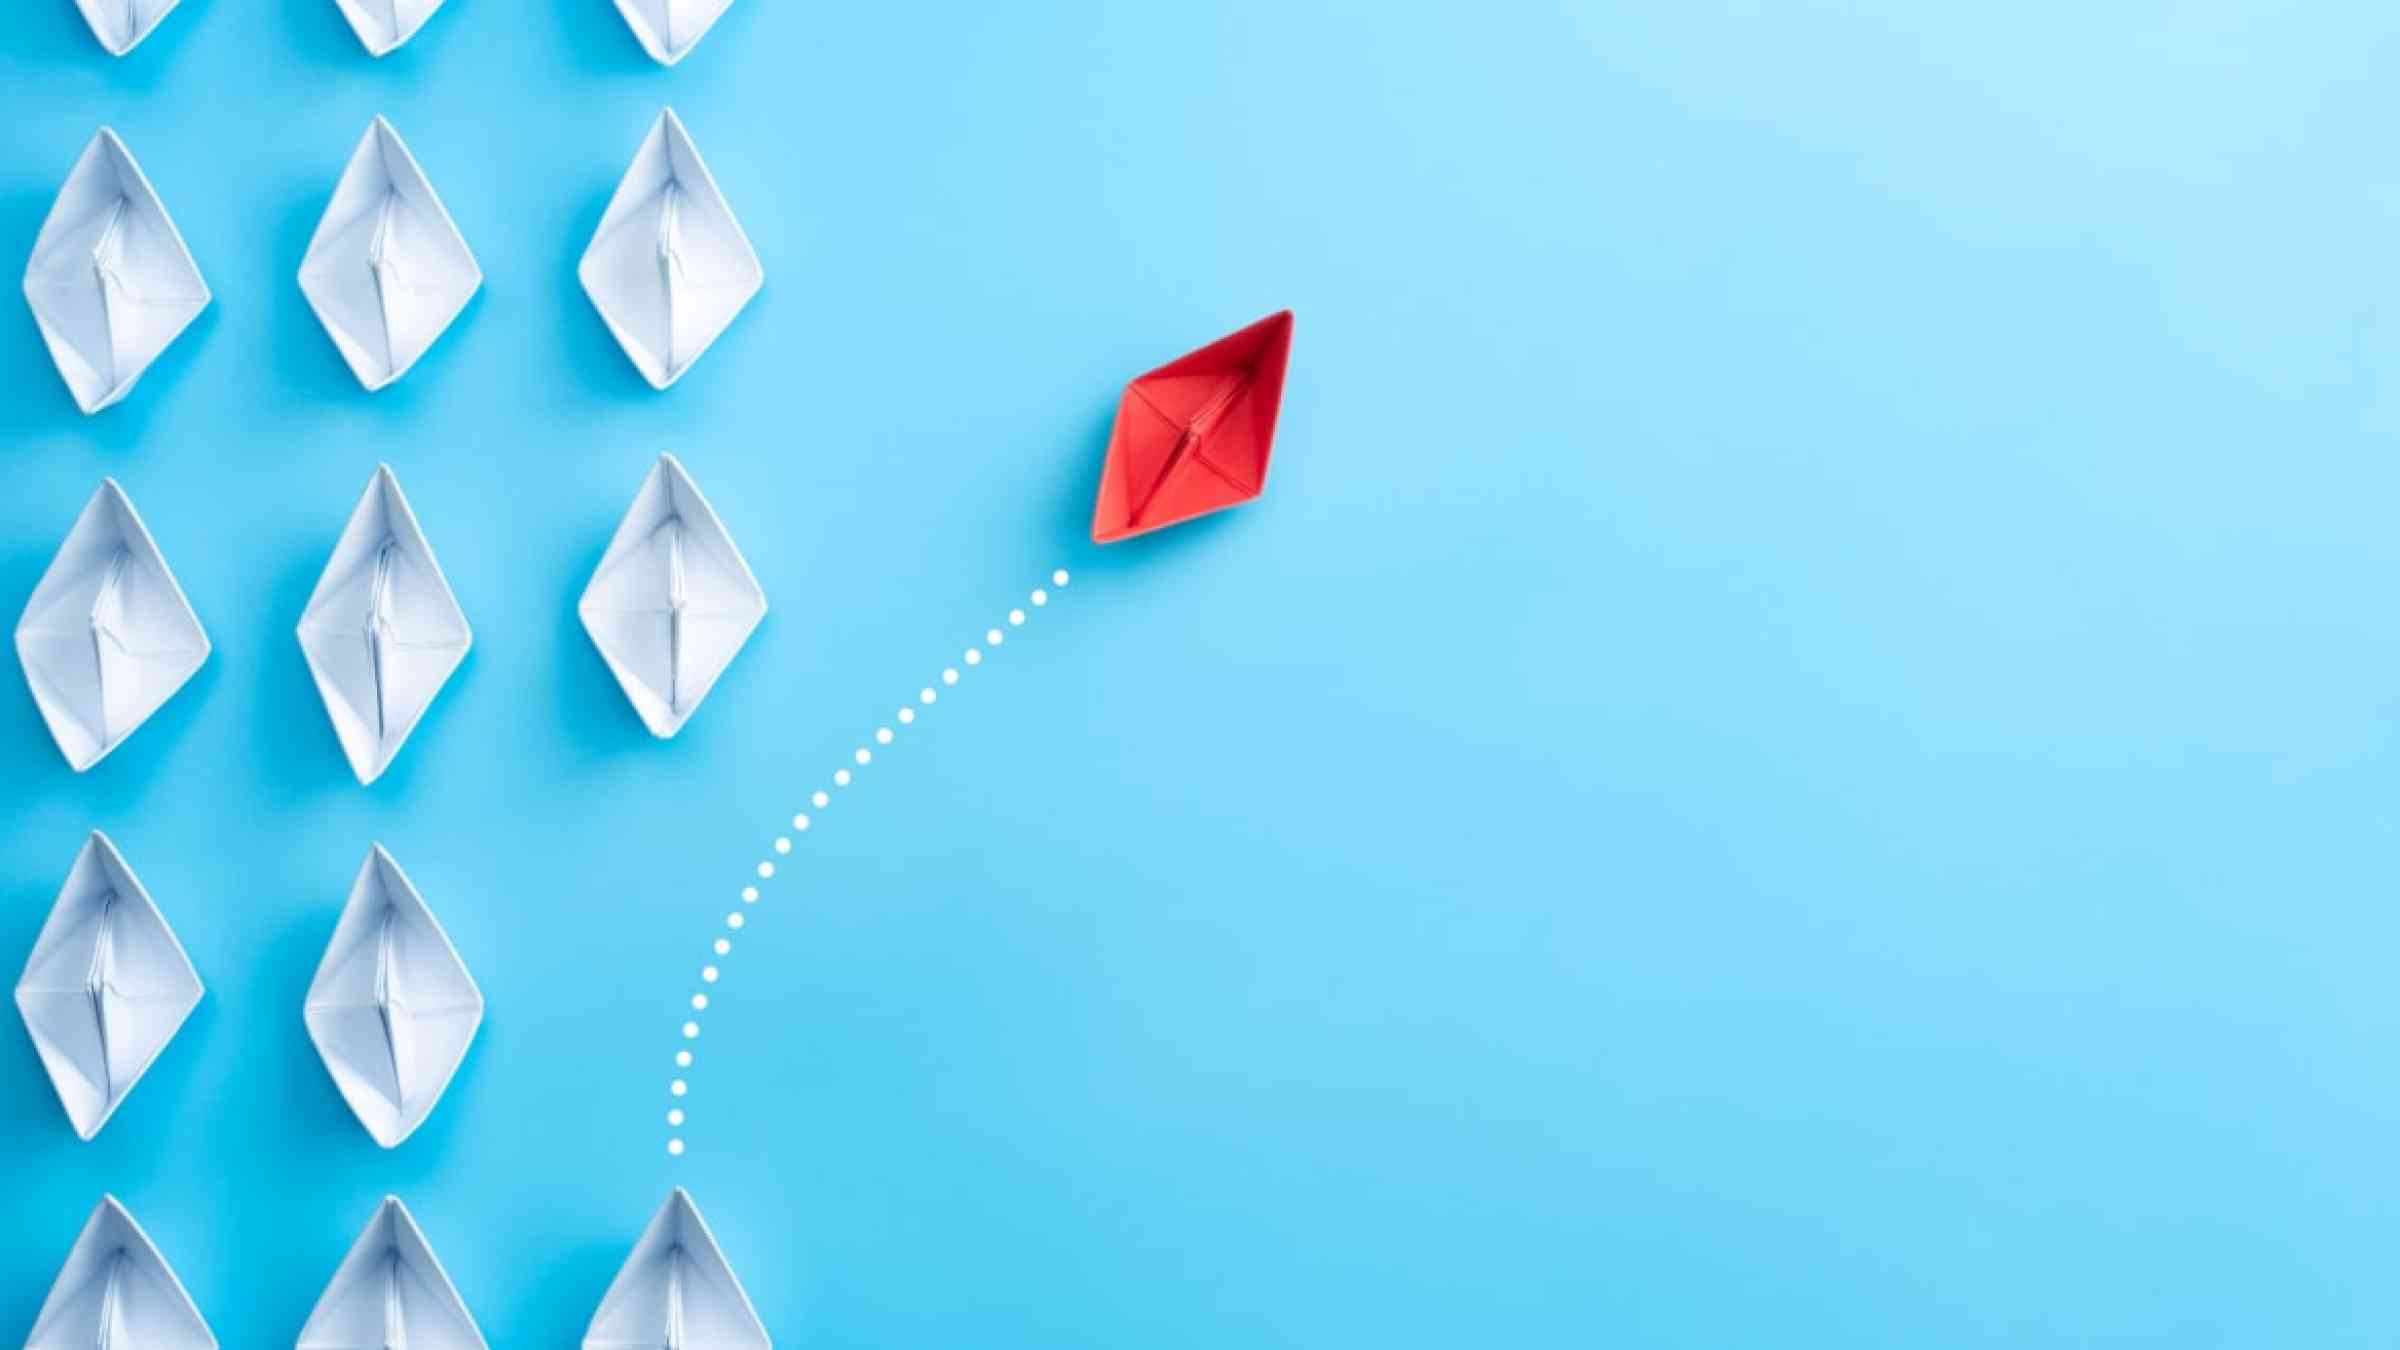 Group of white paper ship in one direction and one red paper ship pointing in different way on blue background.